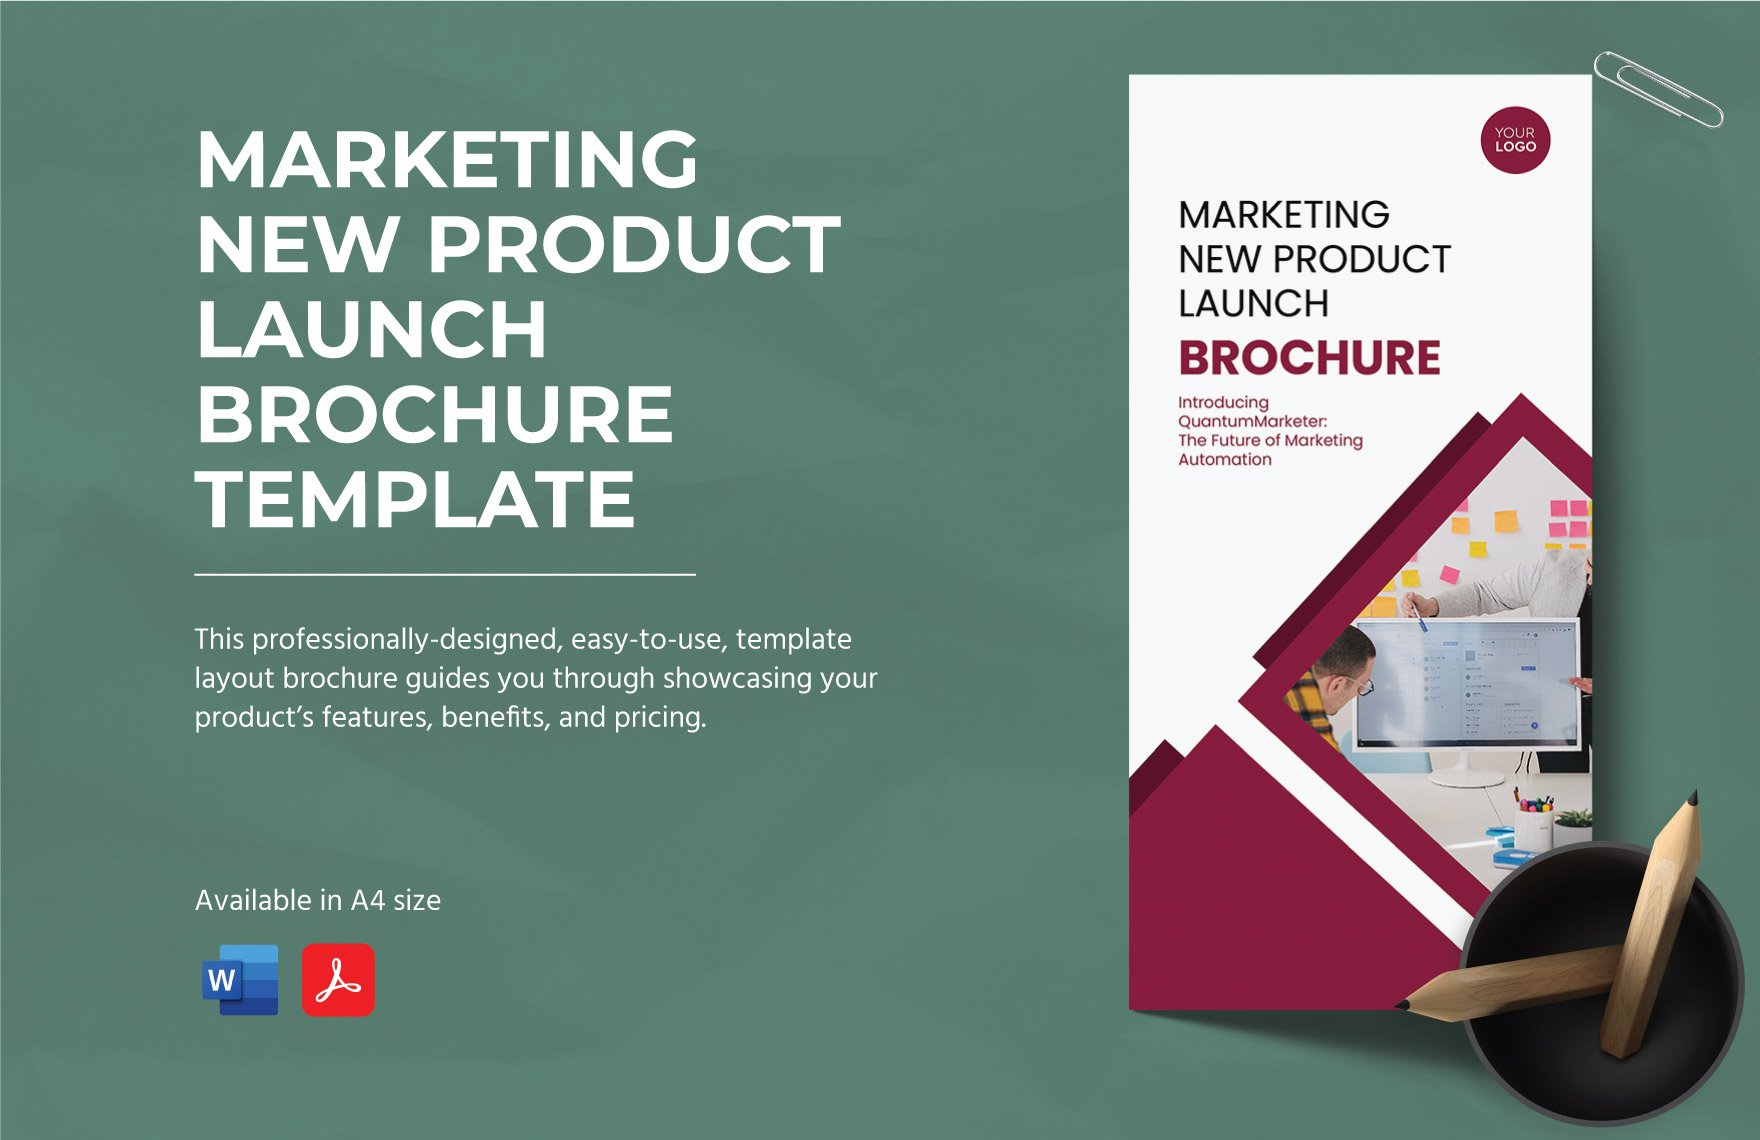 Marketing New Product Launch Brochure Template